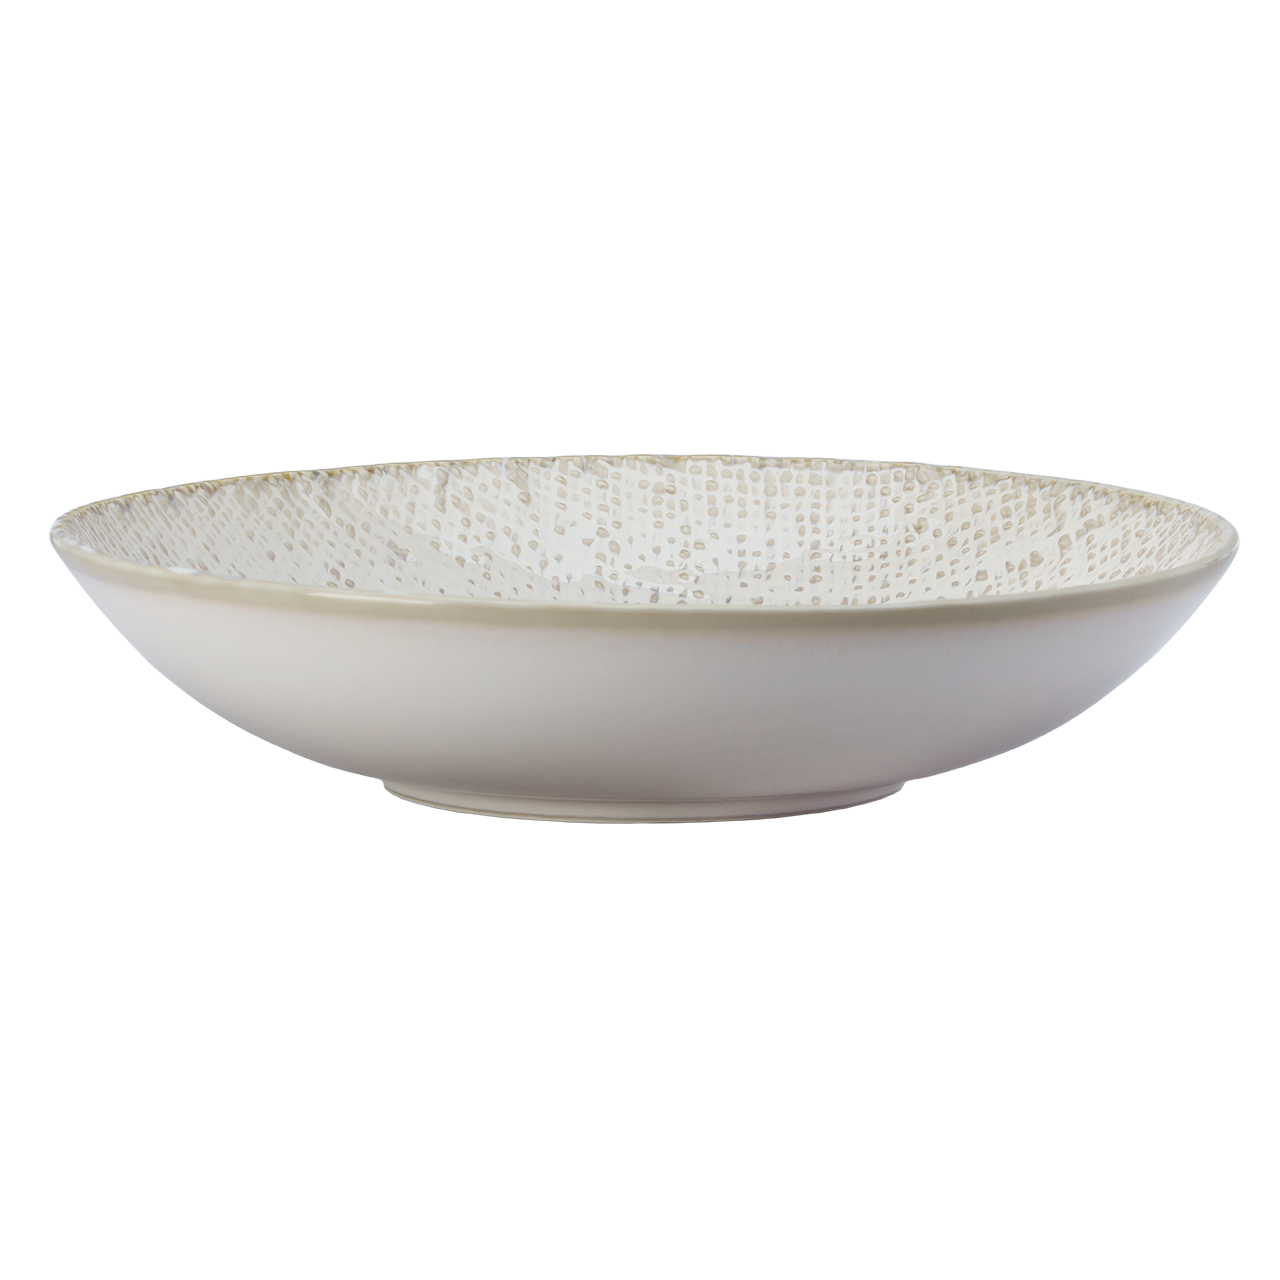 Knit - Deep Round Coupe Plate